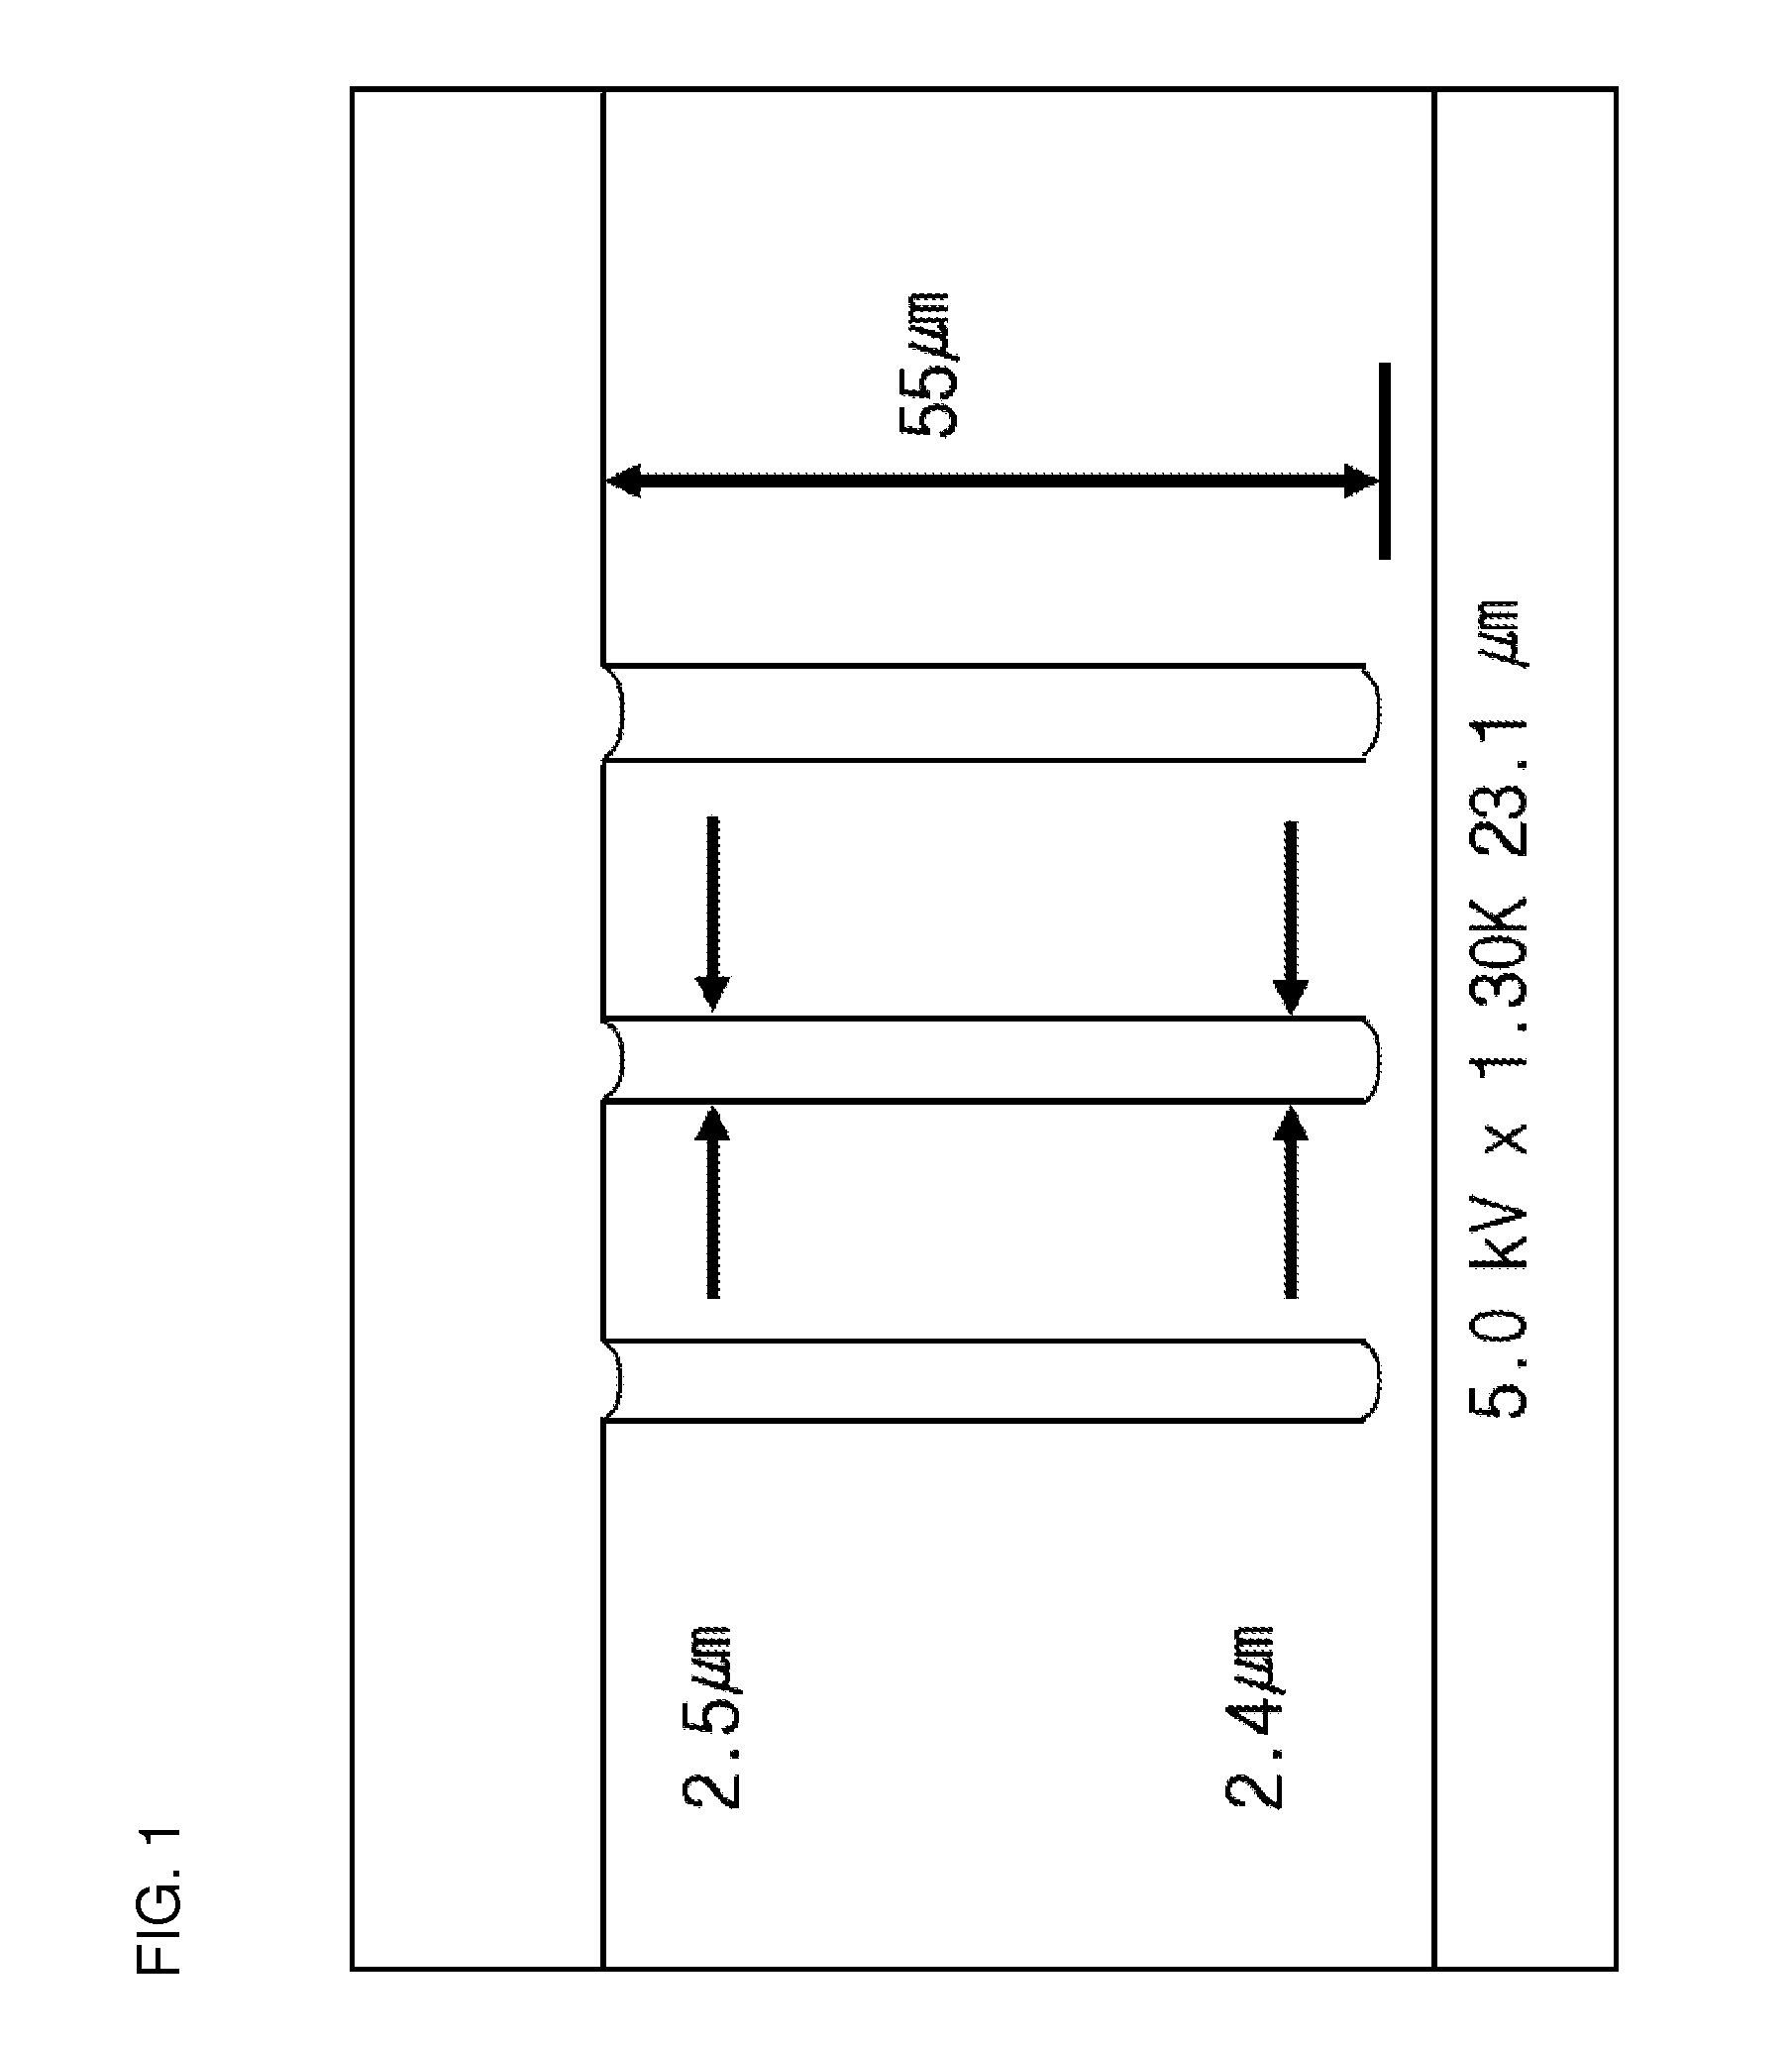 Unit pixel of image sensor having three-dimensional structure and method for manufacturing the same